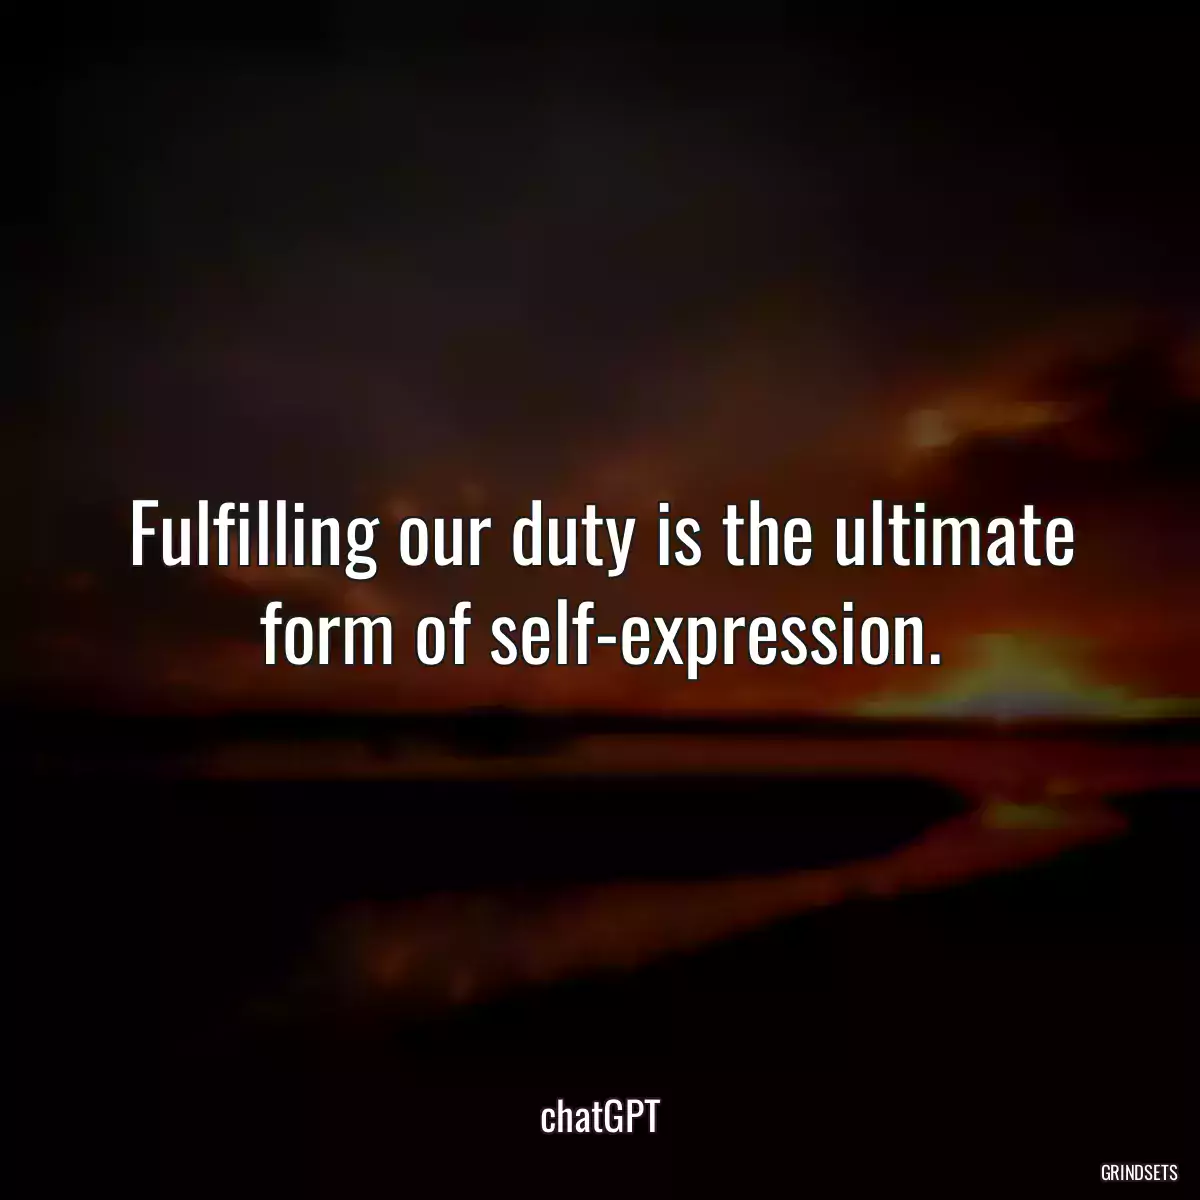 Fulfilling our duty is the ultimate form of self-expression.